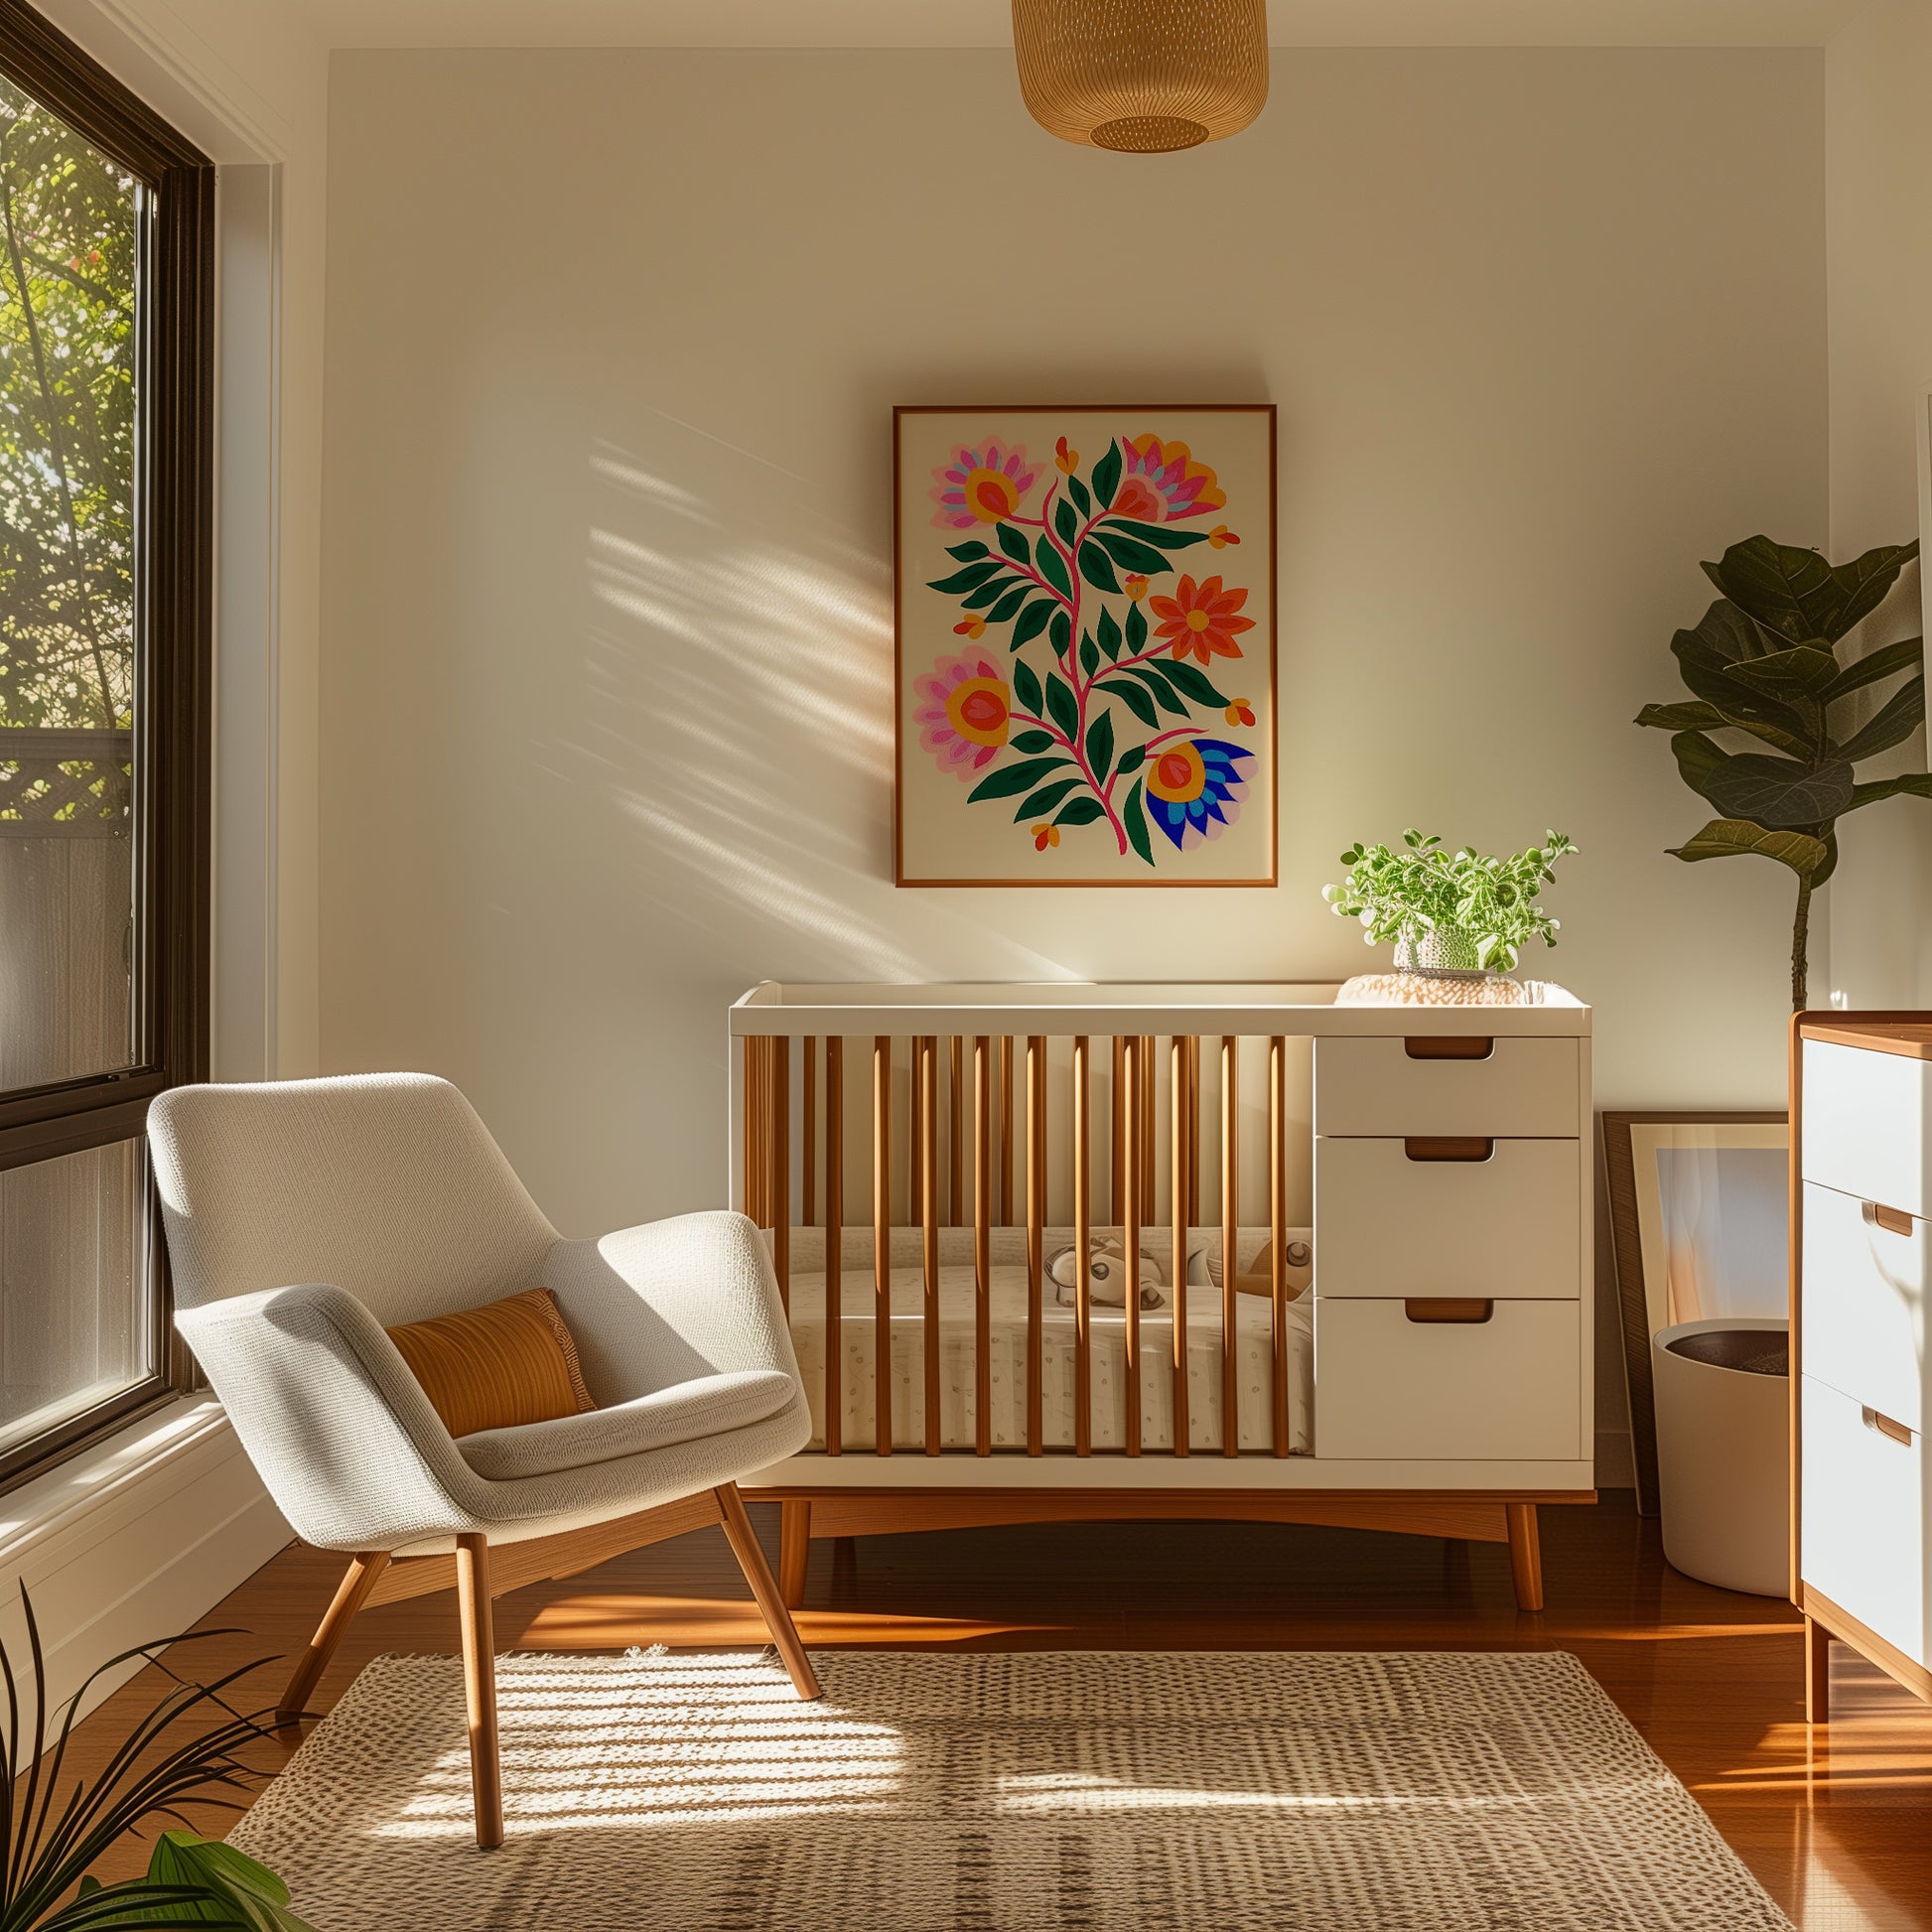 A cozy nursery with a crib, armchair, and colorful wall art, bathed in warm sunlight.